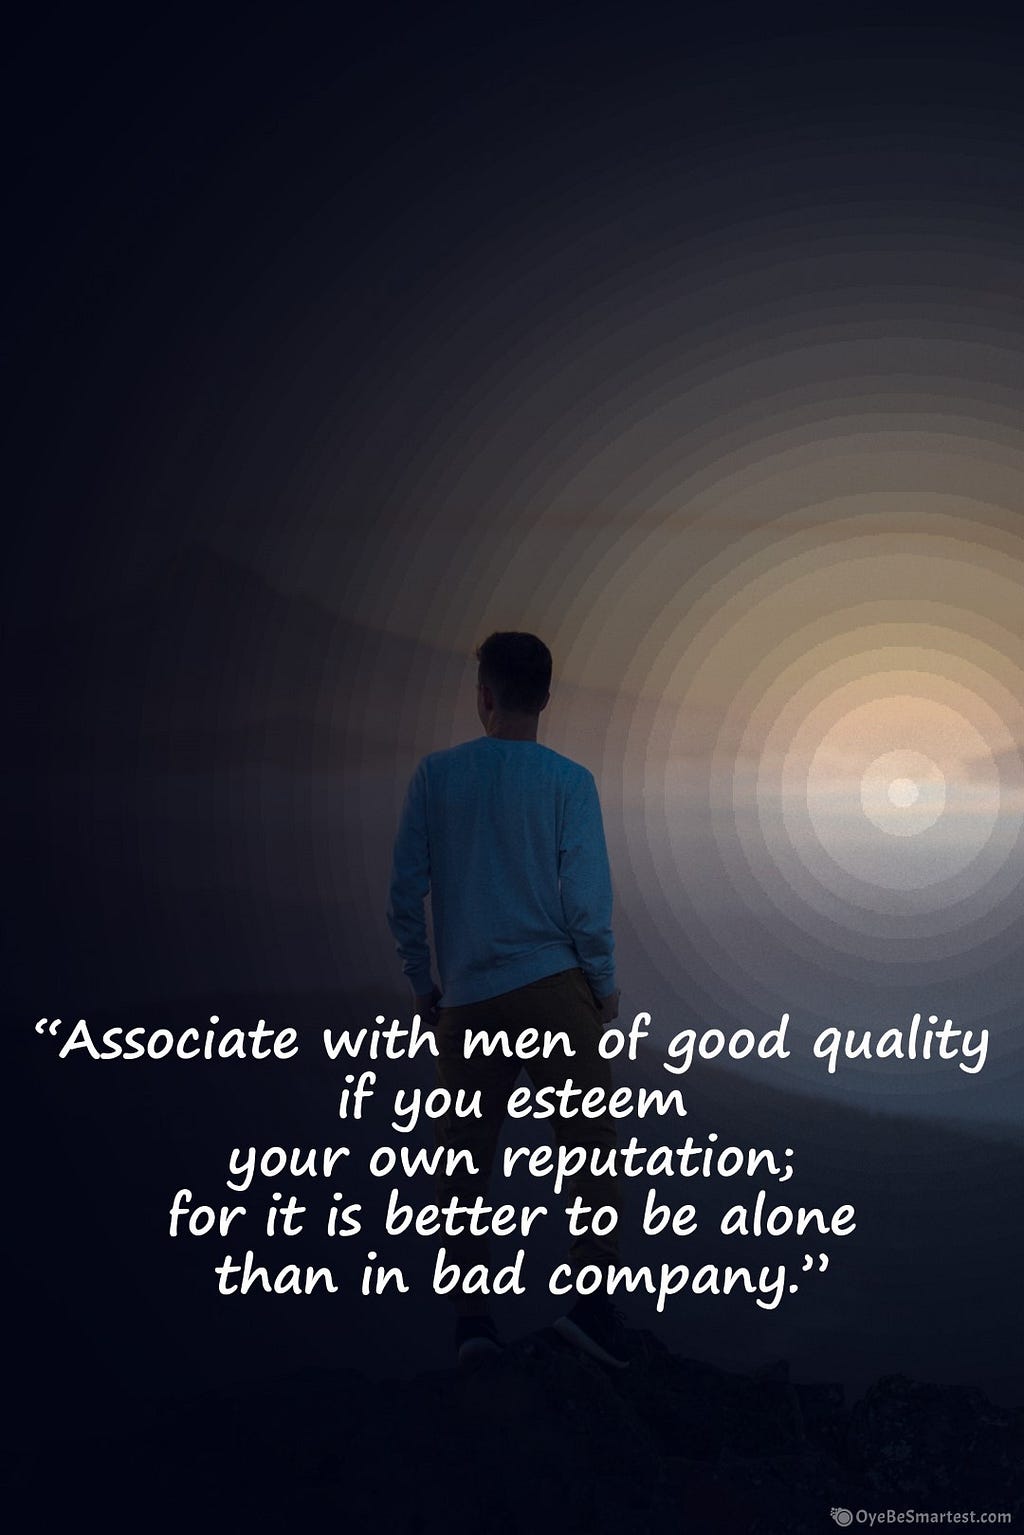 “Associate with men of good quality
 if you esteem
 your own reputation;
 for it is better to be alone
 than in bad company.”